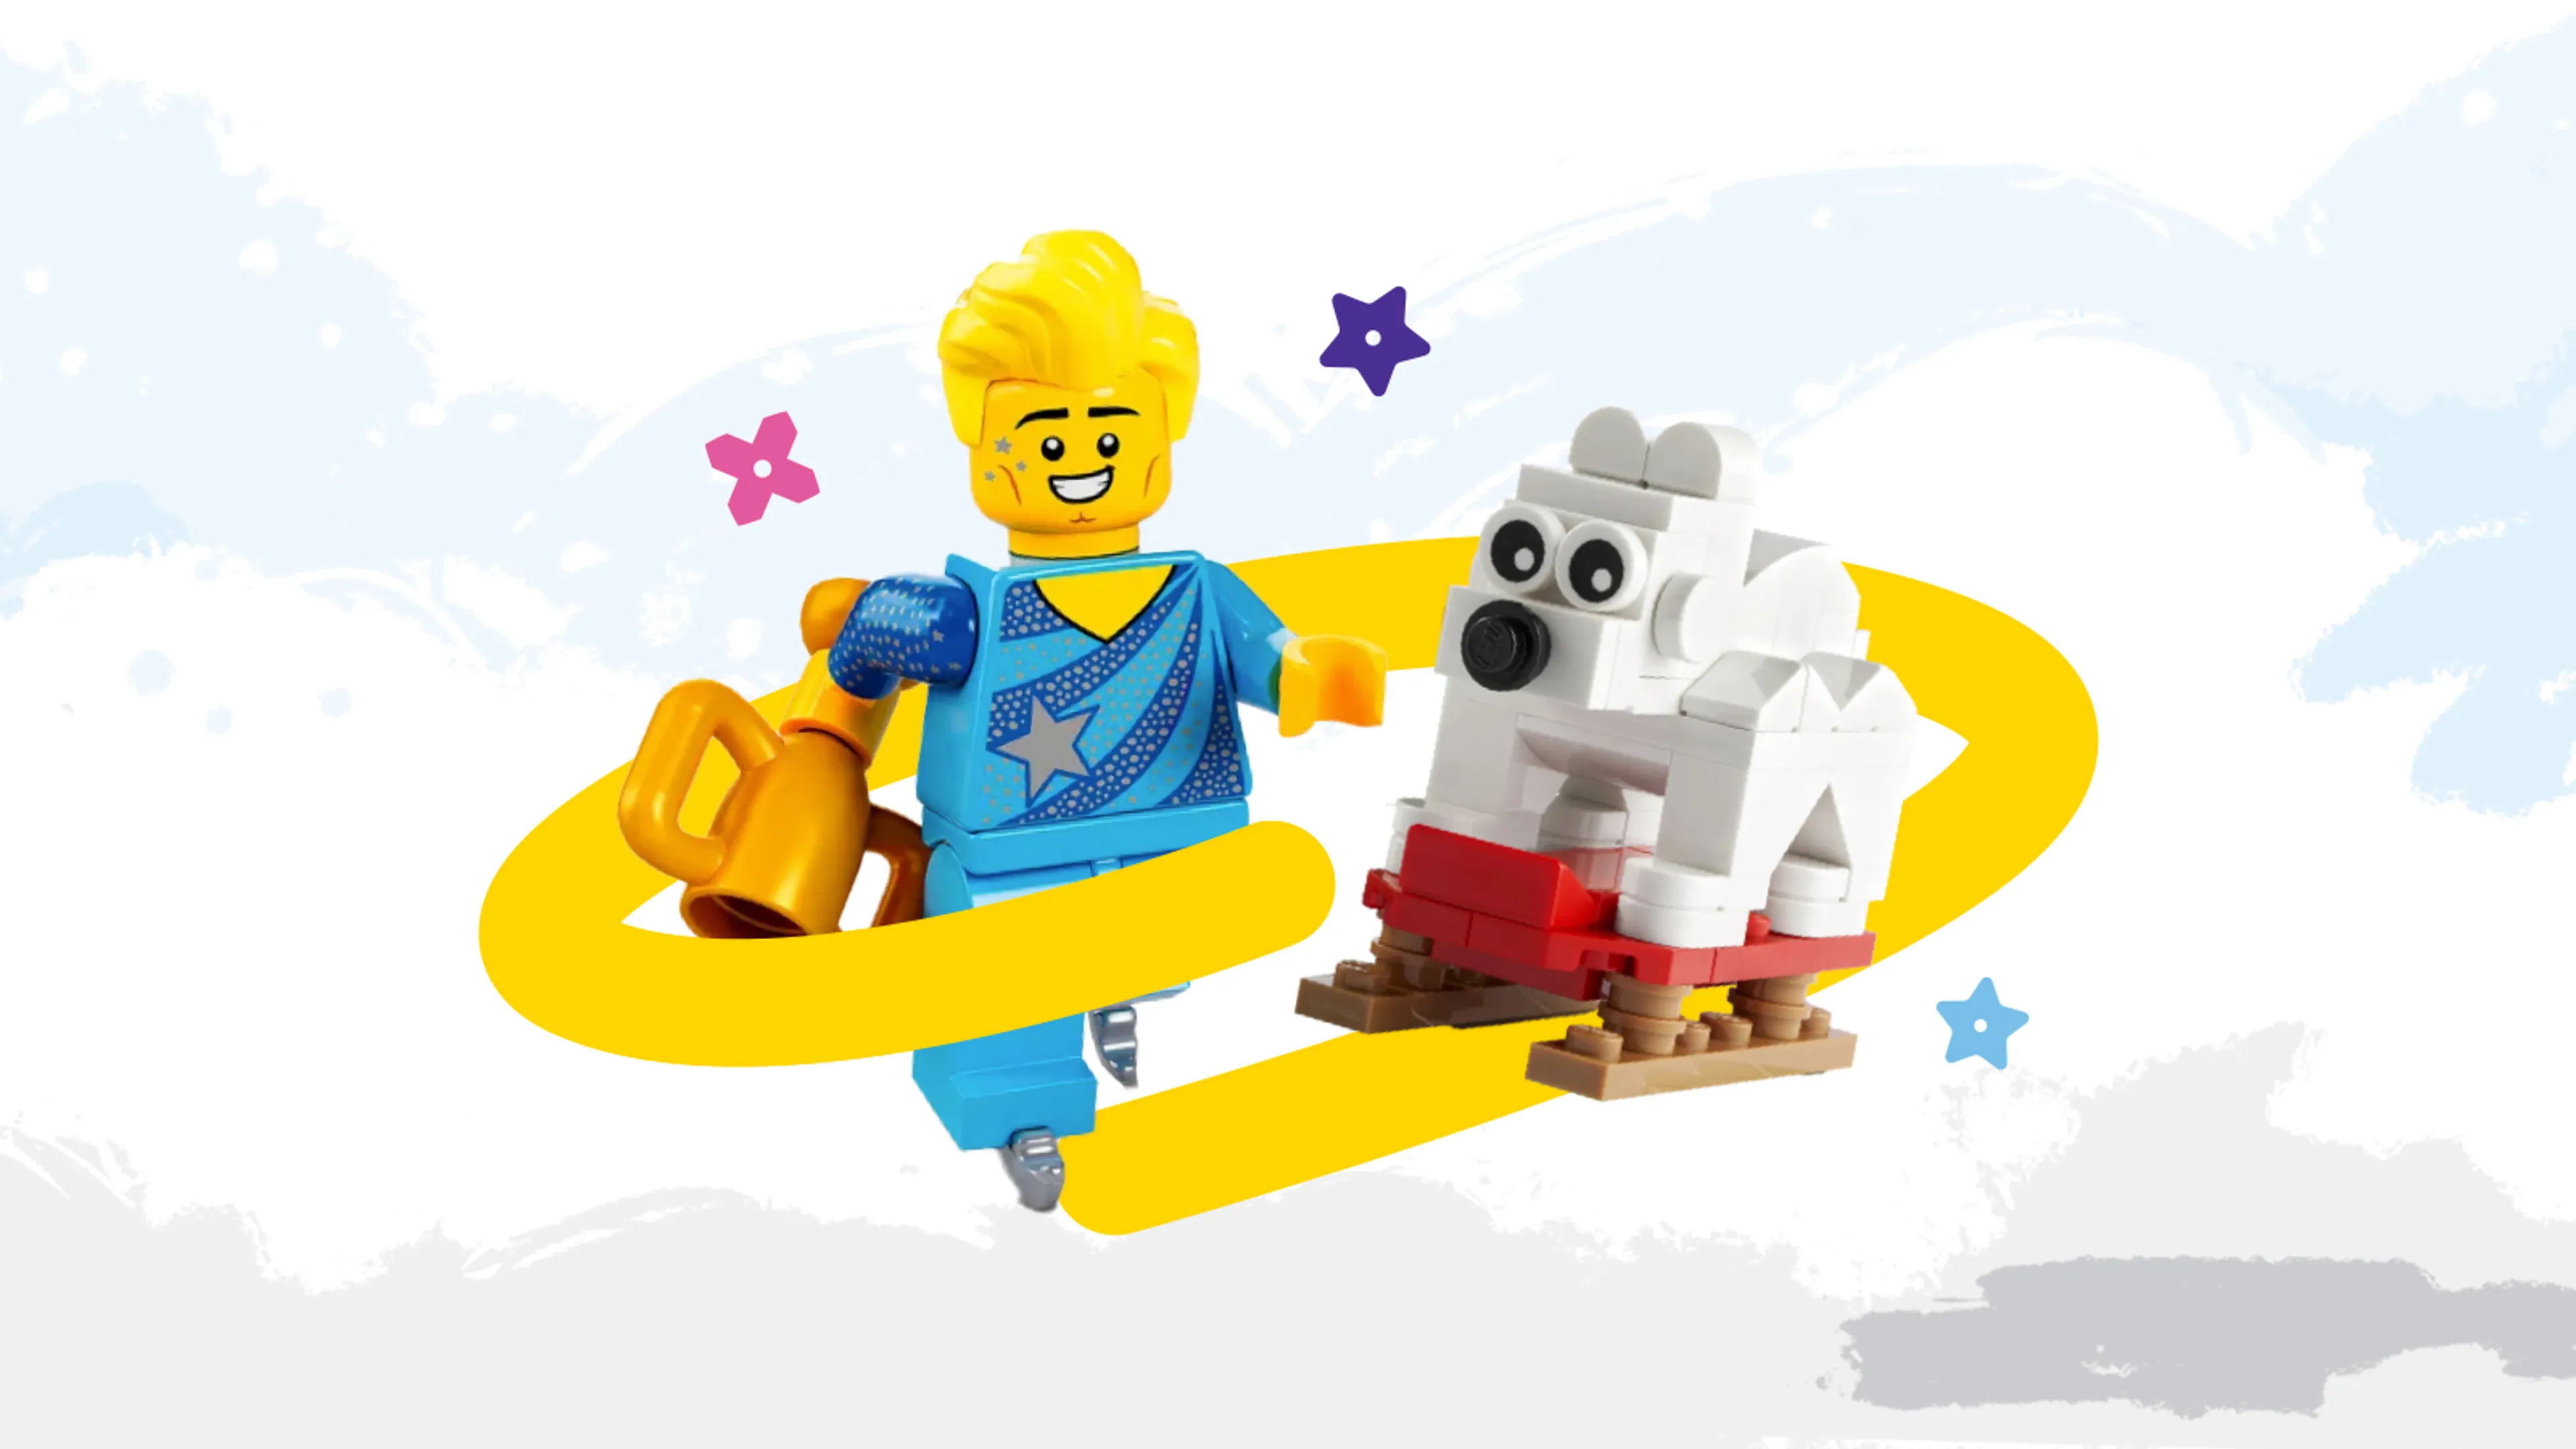 A minifigure and a LEGO animal skating